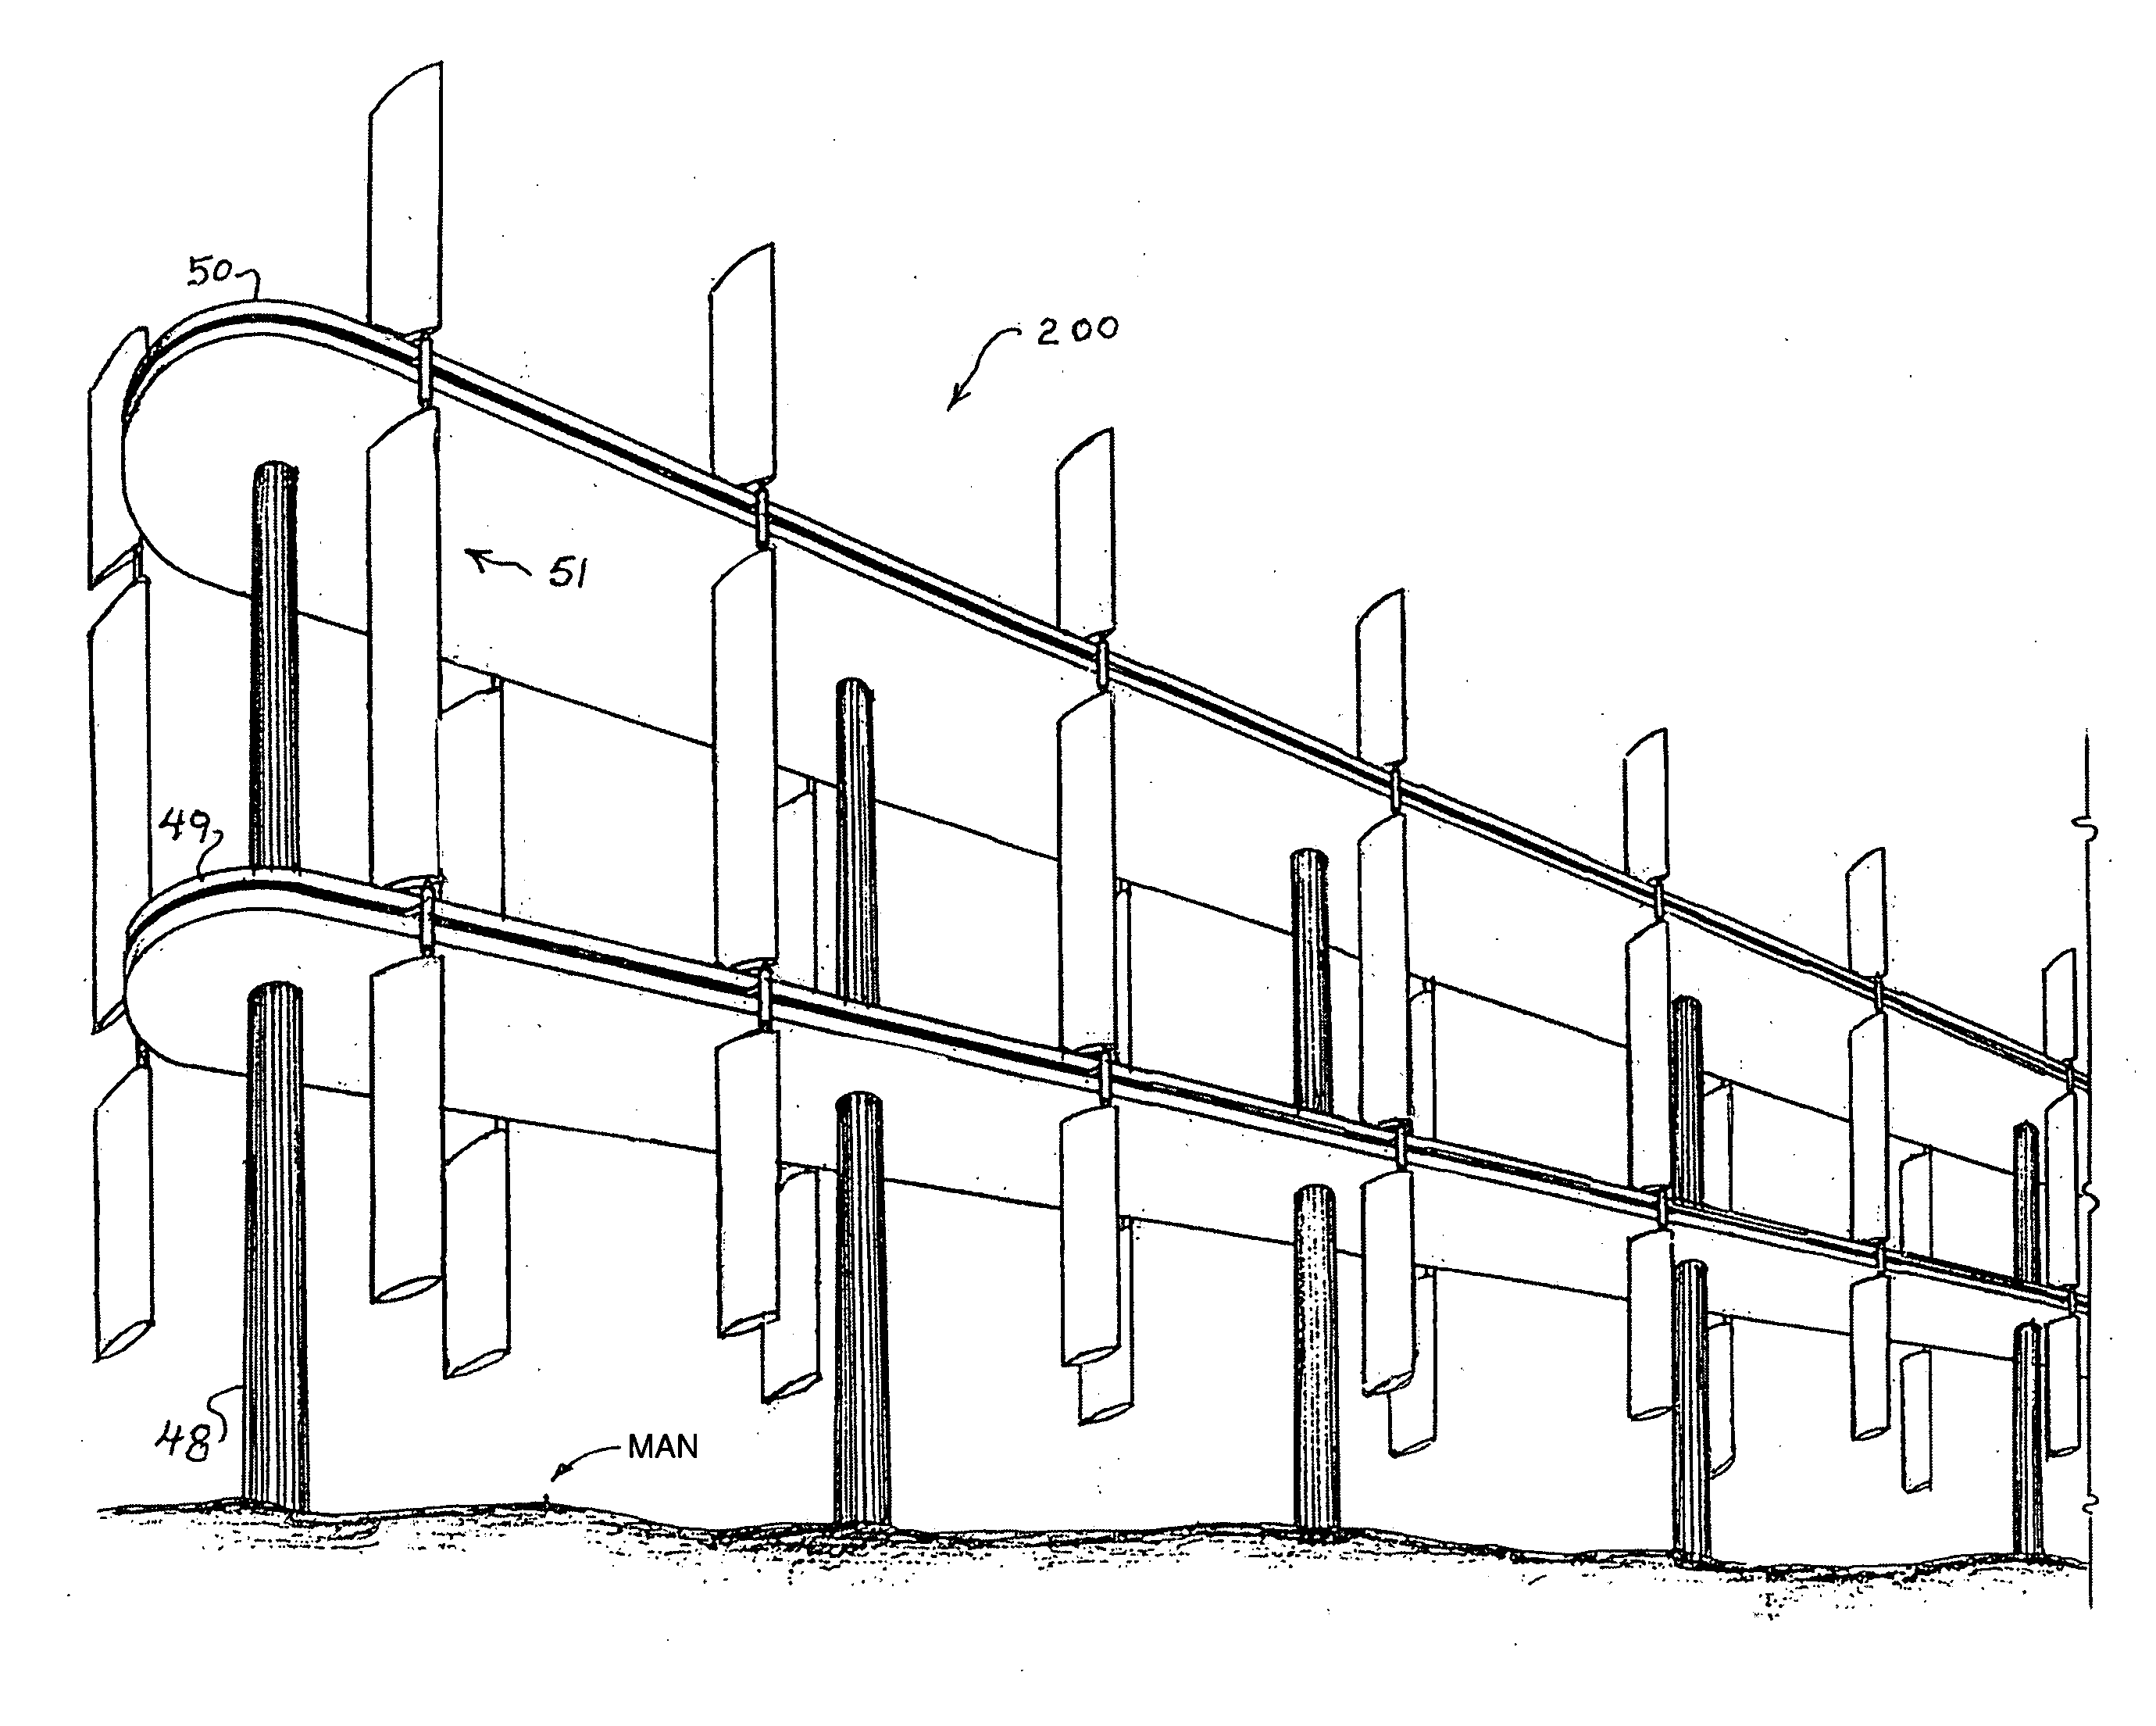 Wind and water power generation device using a tiered monorail system